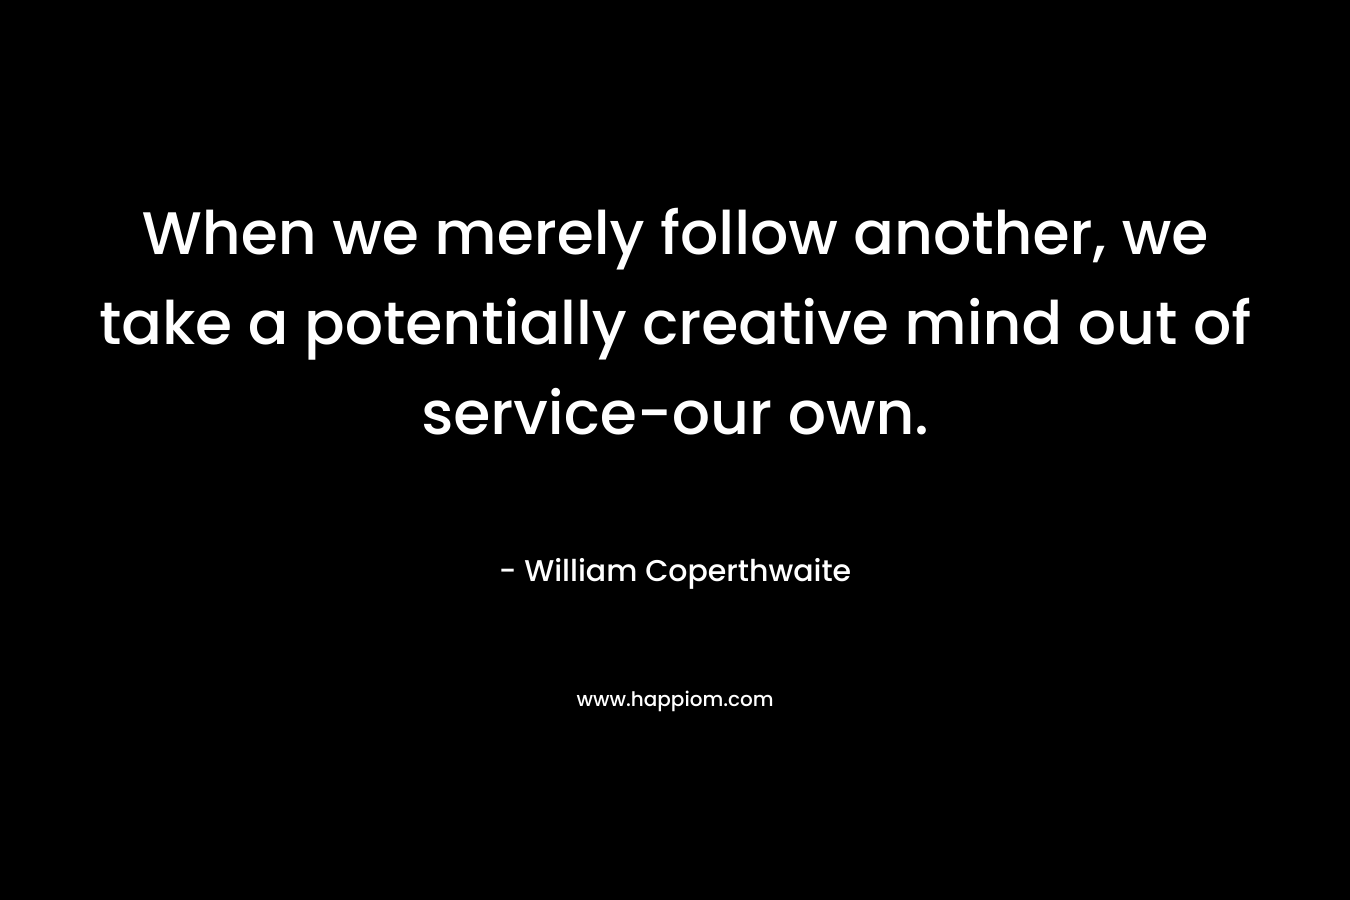 When we merely follow another, we take a potentially creative mind out of service-our own. 